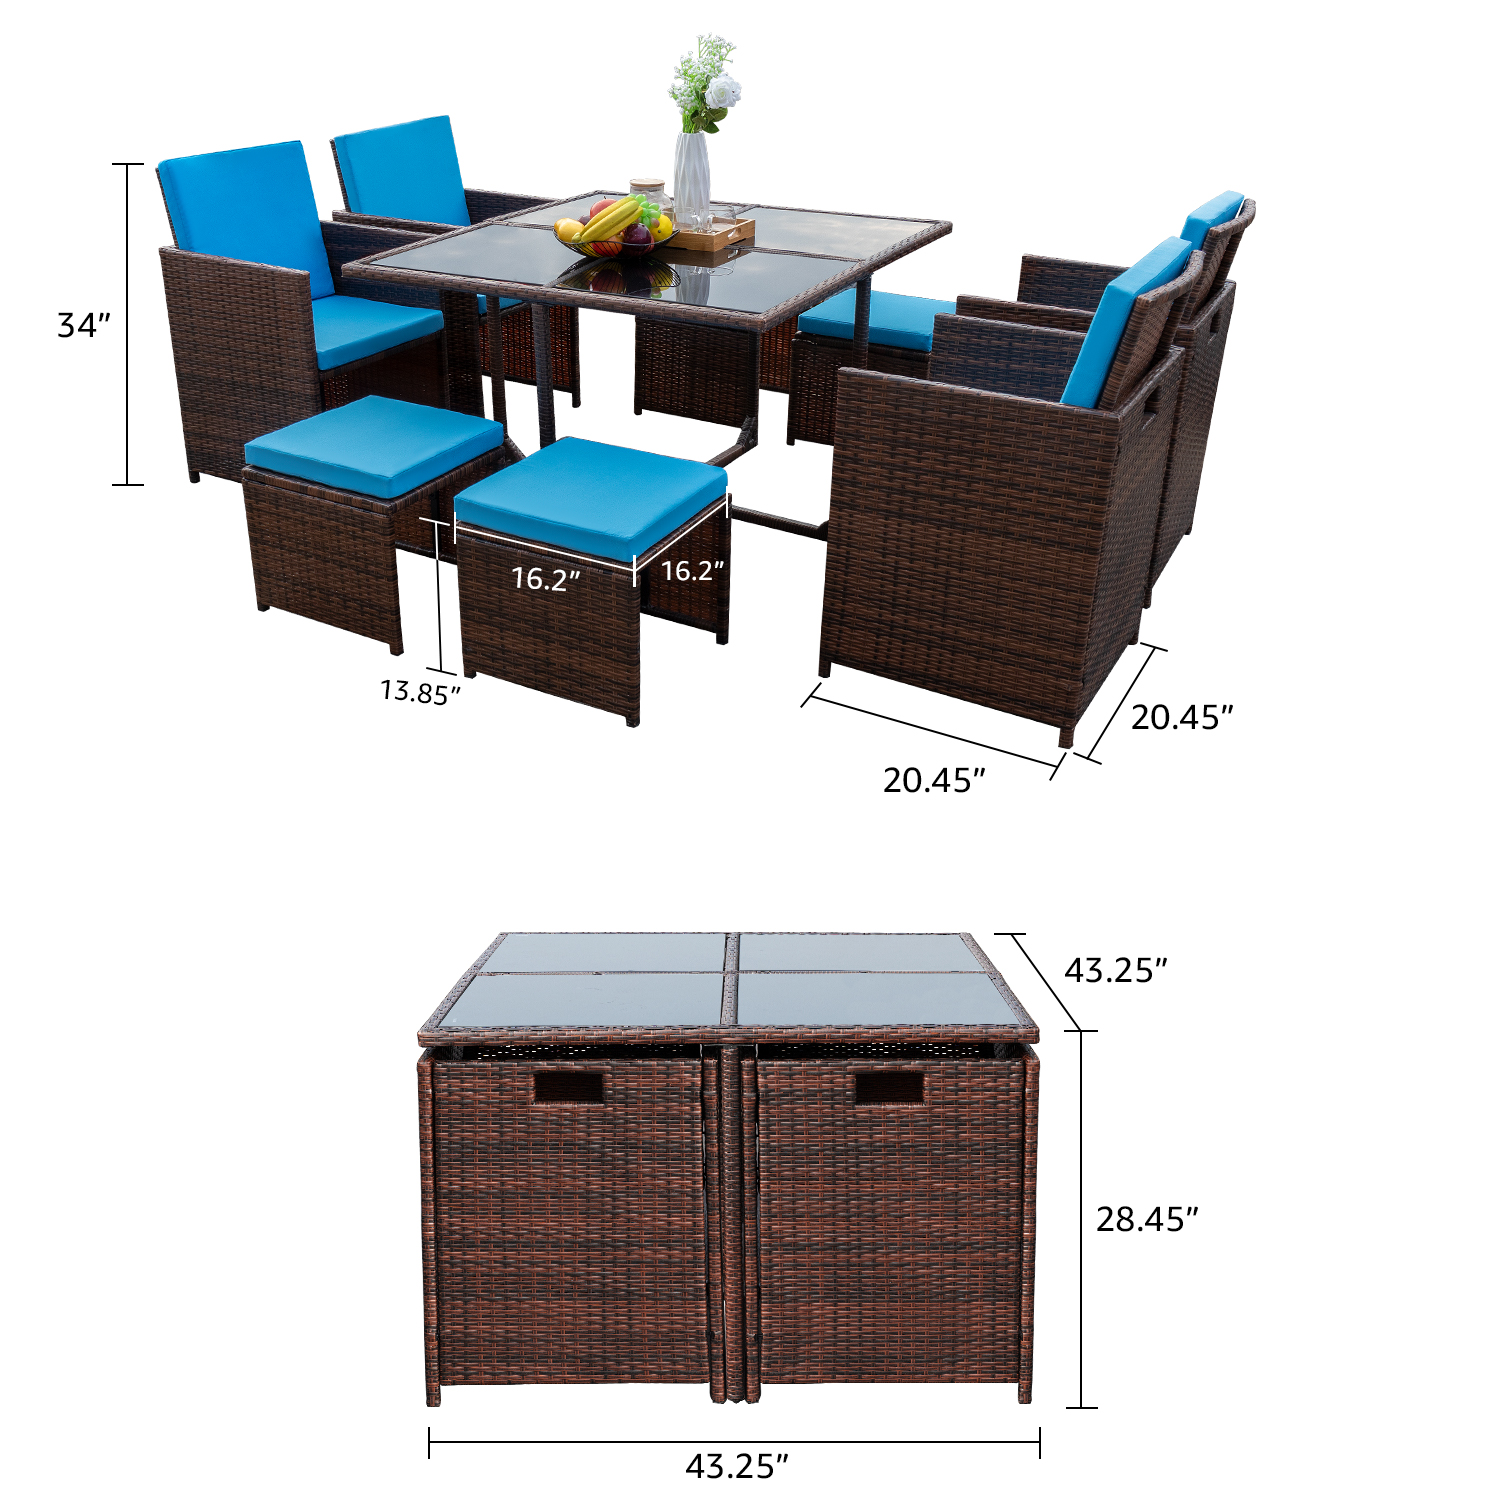 Lacoo 9 Pieces Patio Dining Sets Outdoor Furniture Patio Wicker Rattan Chairs and Tempered Glass Table Sectional Set Conversation Set Cushioned with Ottoman (Blue) - image 3 of 3